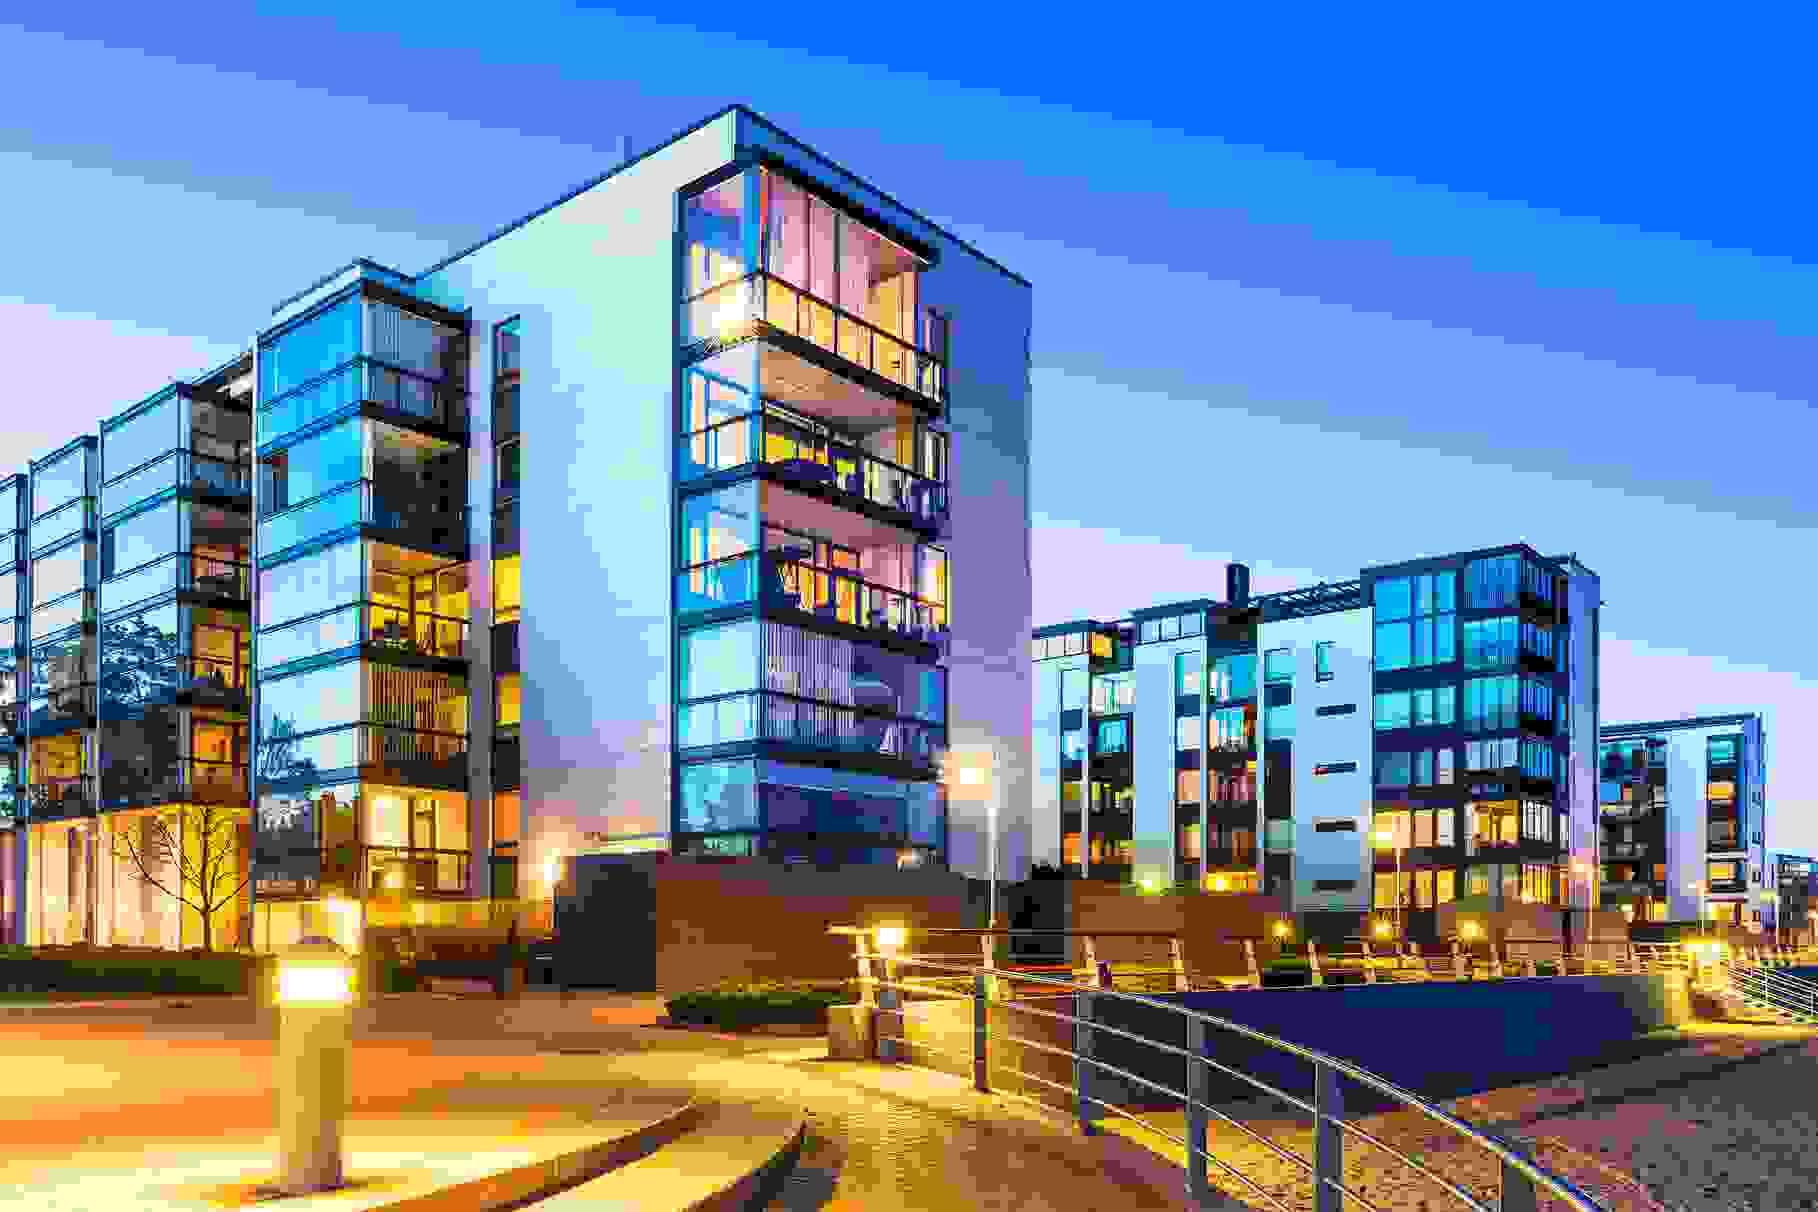 Modern apartment buildings at dusk, lit up by warm-coloured street lights.